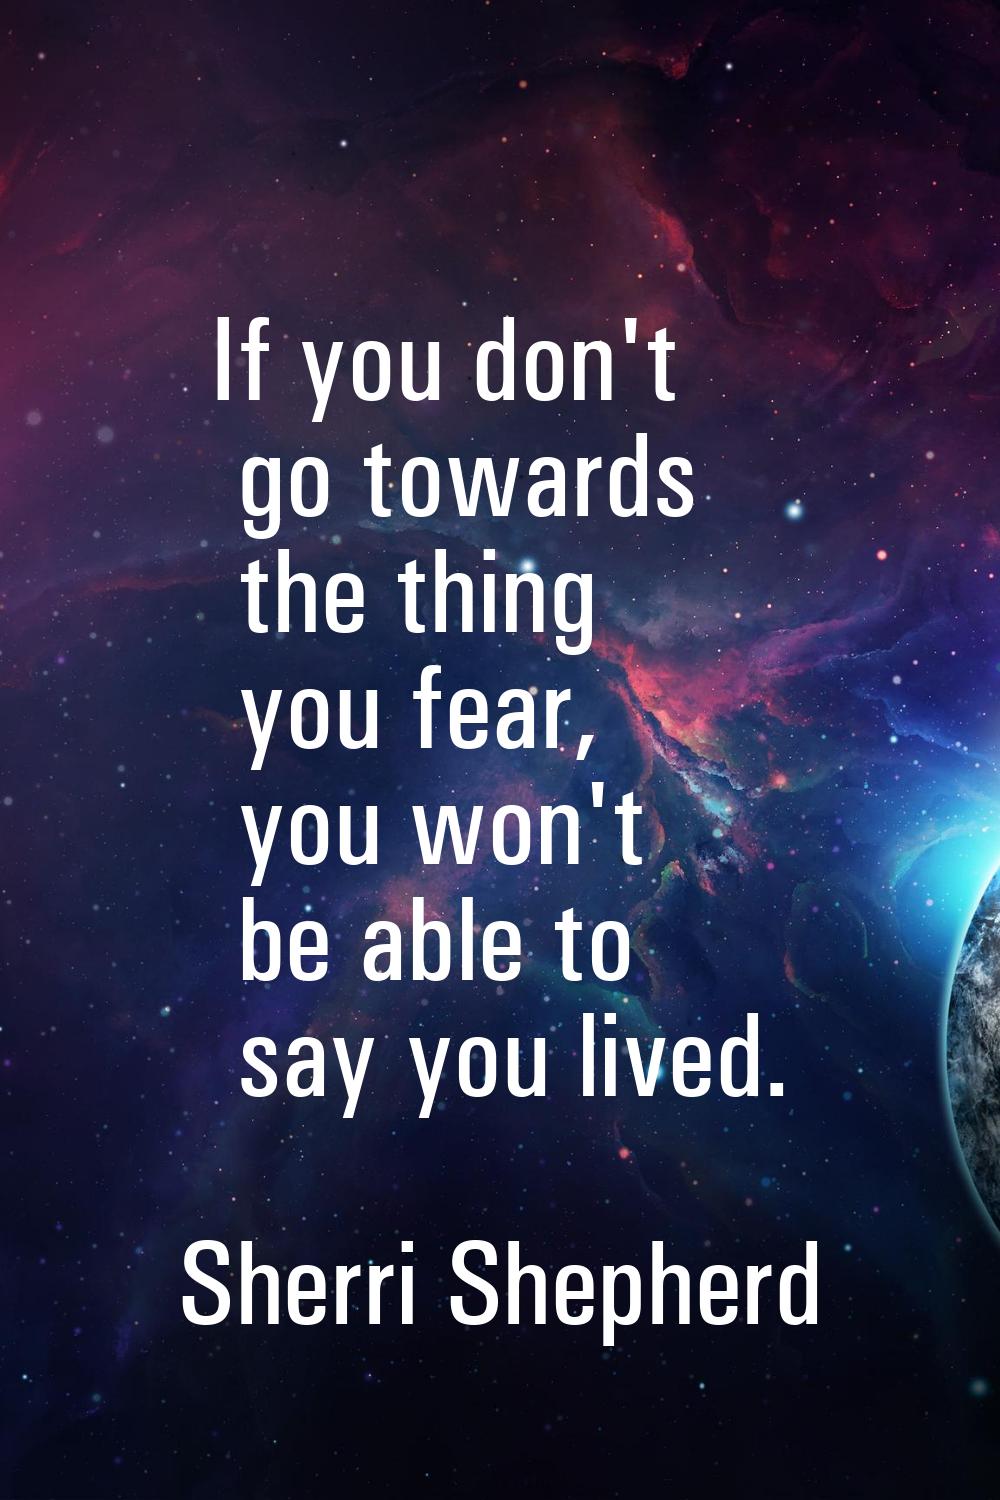 If you don't go towards the thing you fear, you won't be able to say you lived.